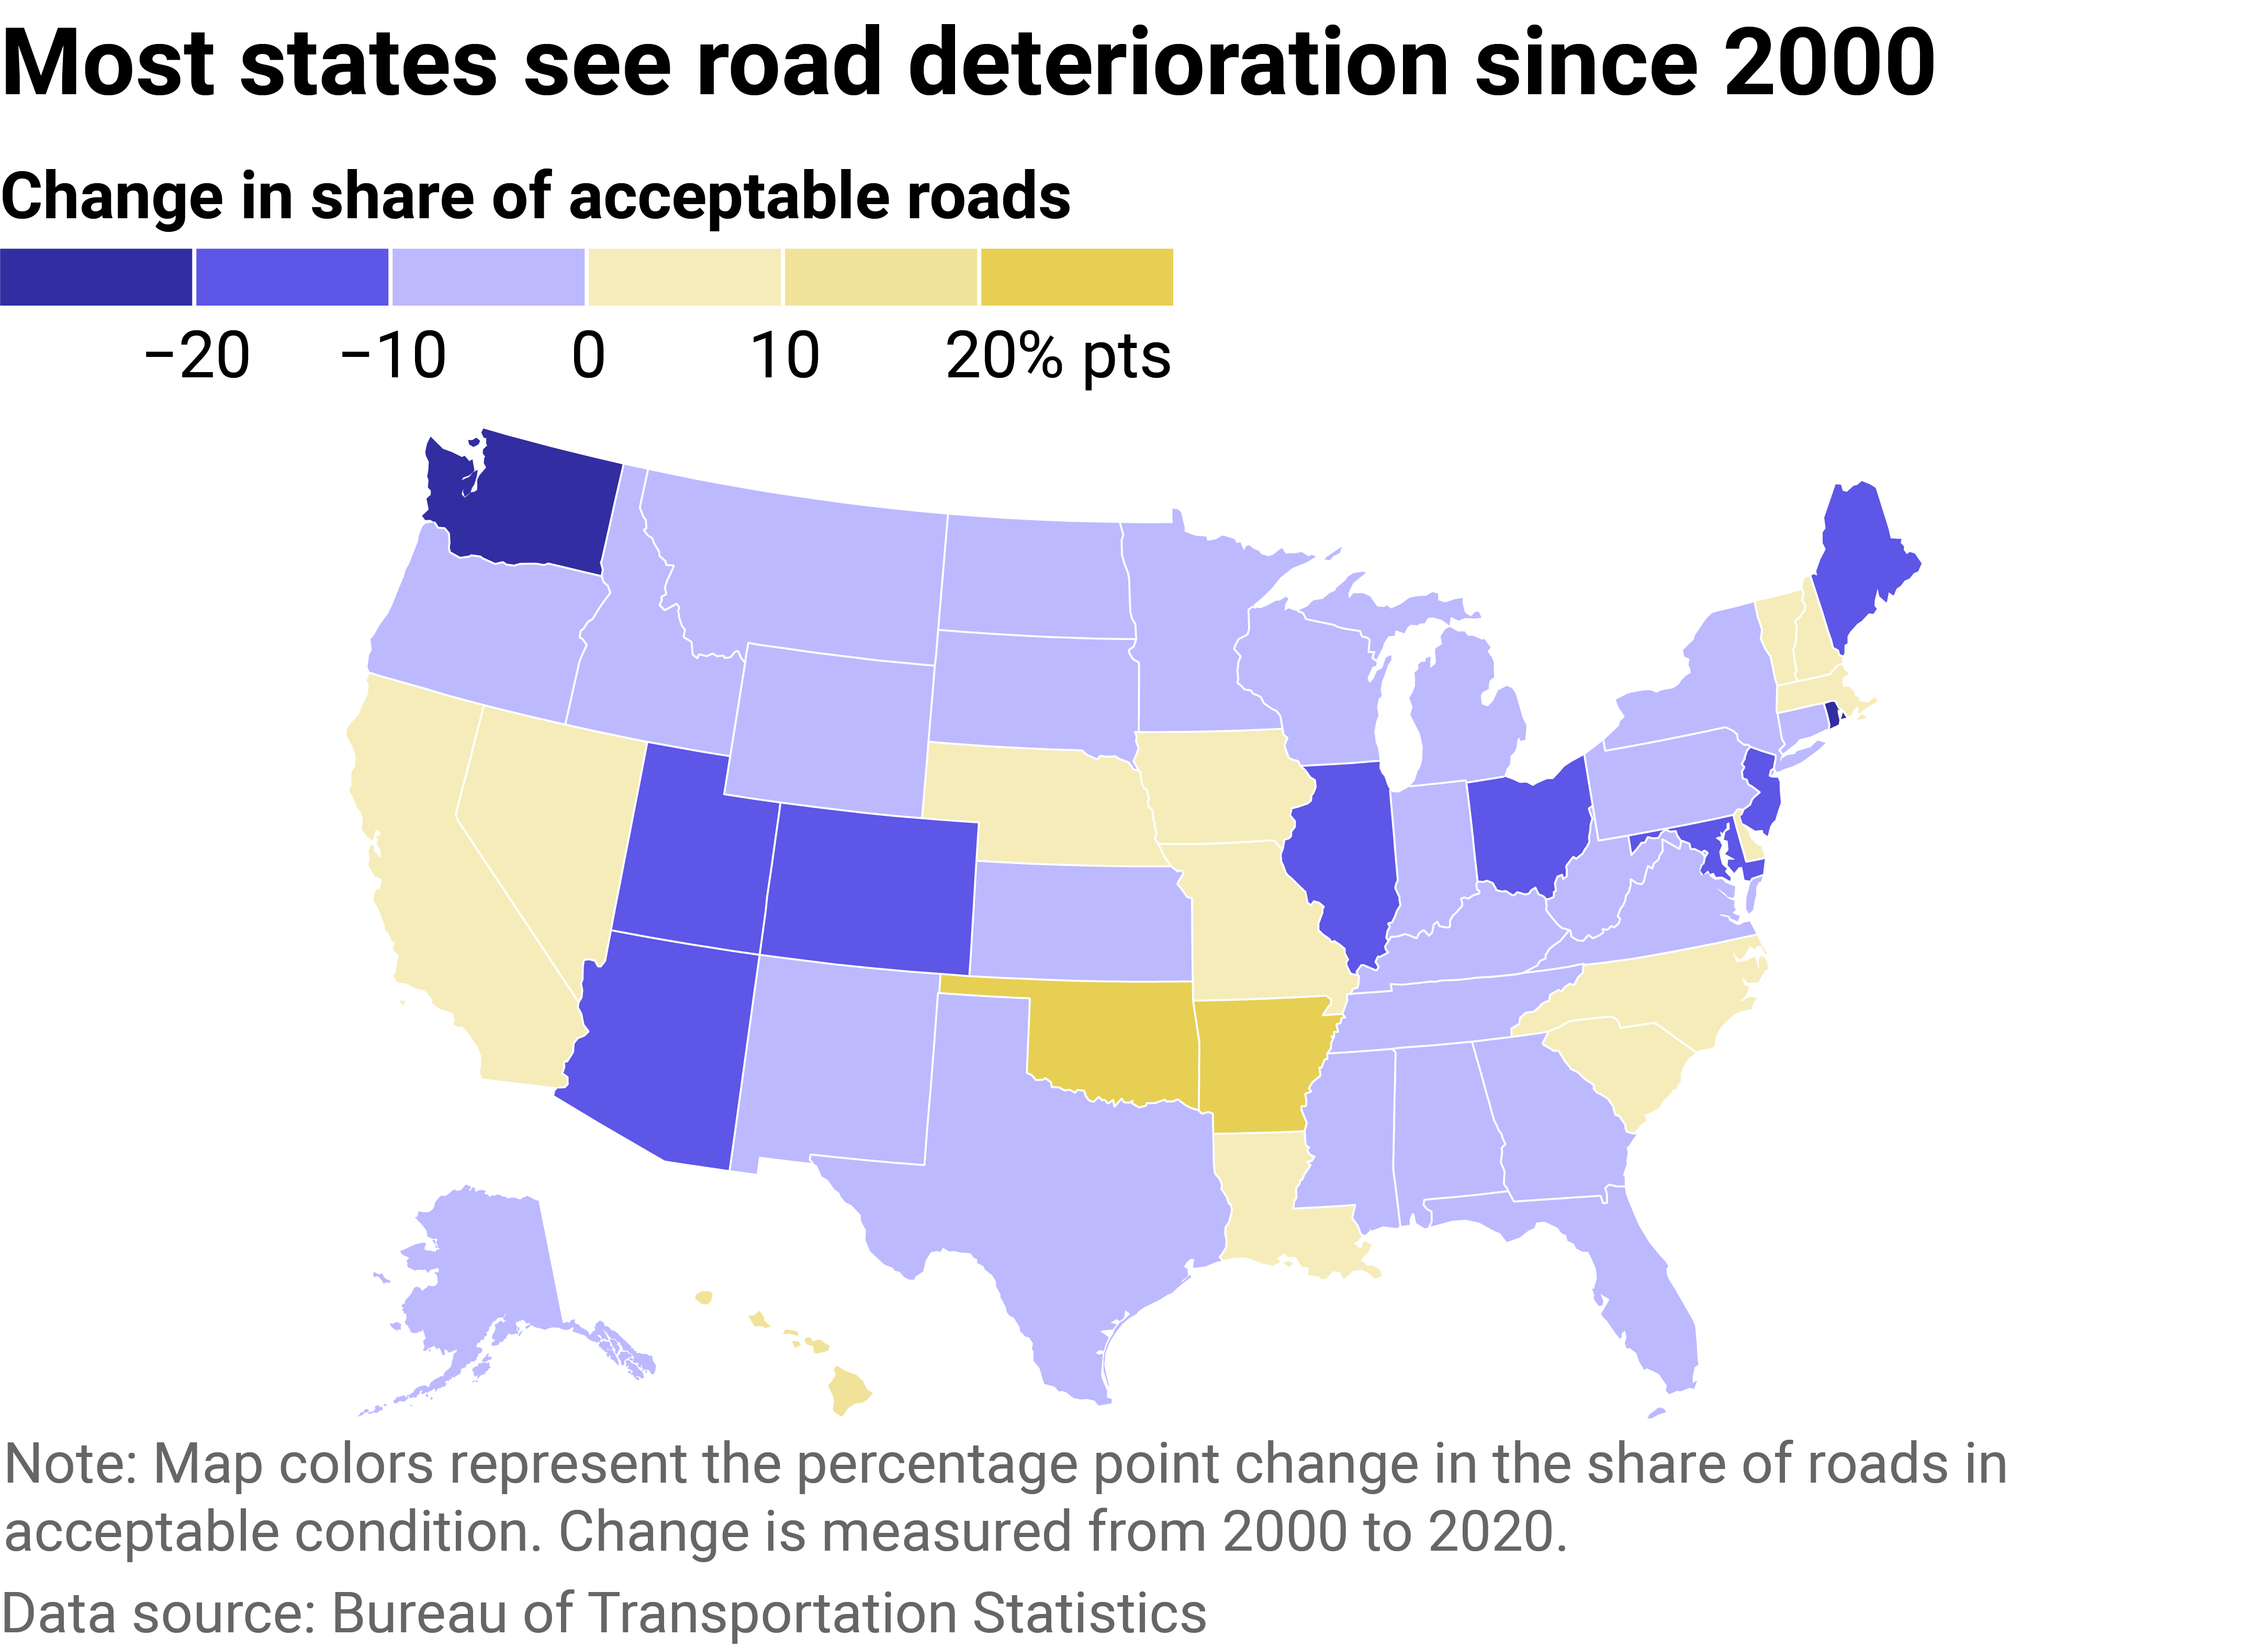 Map showing the change over time in the share of roads in each state that are considered in acceptable condition.